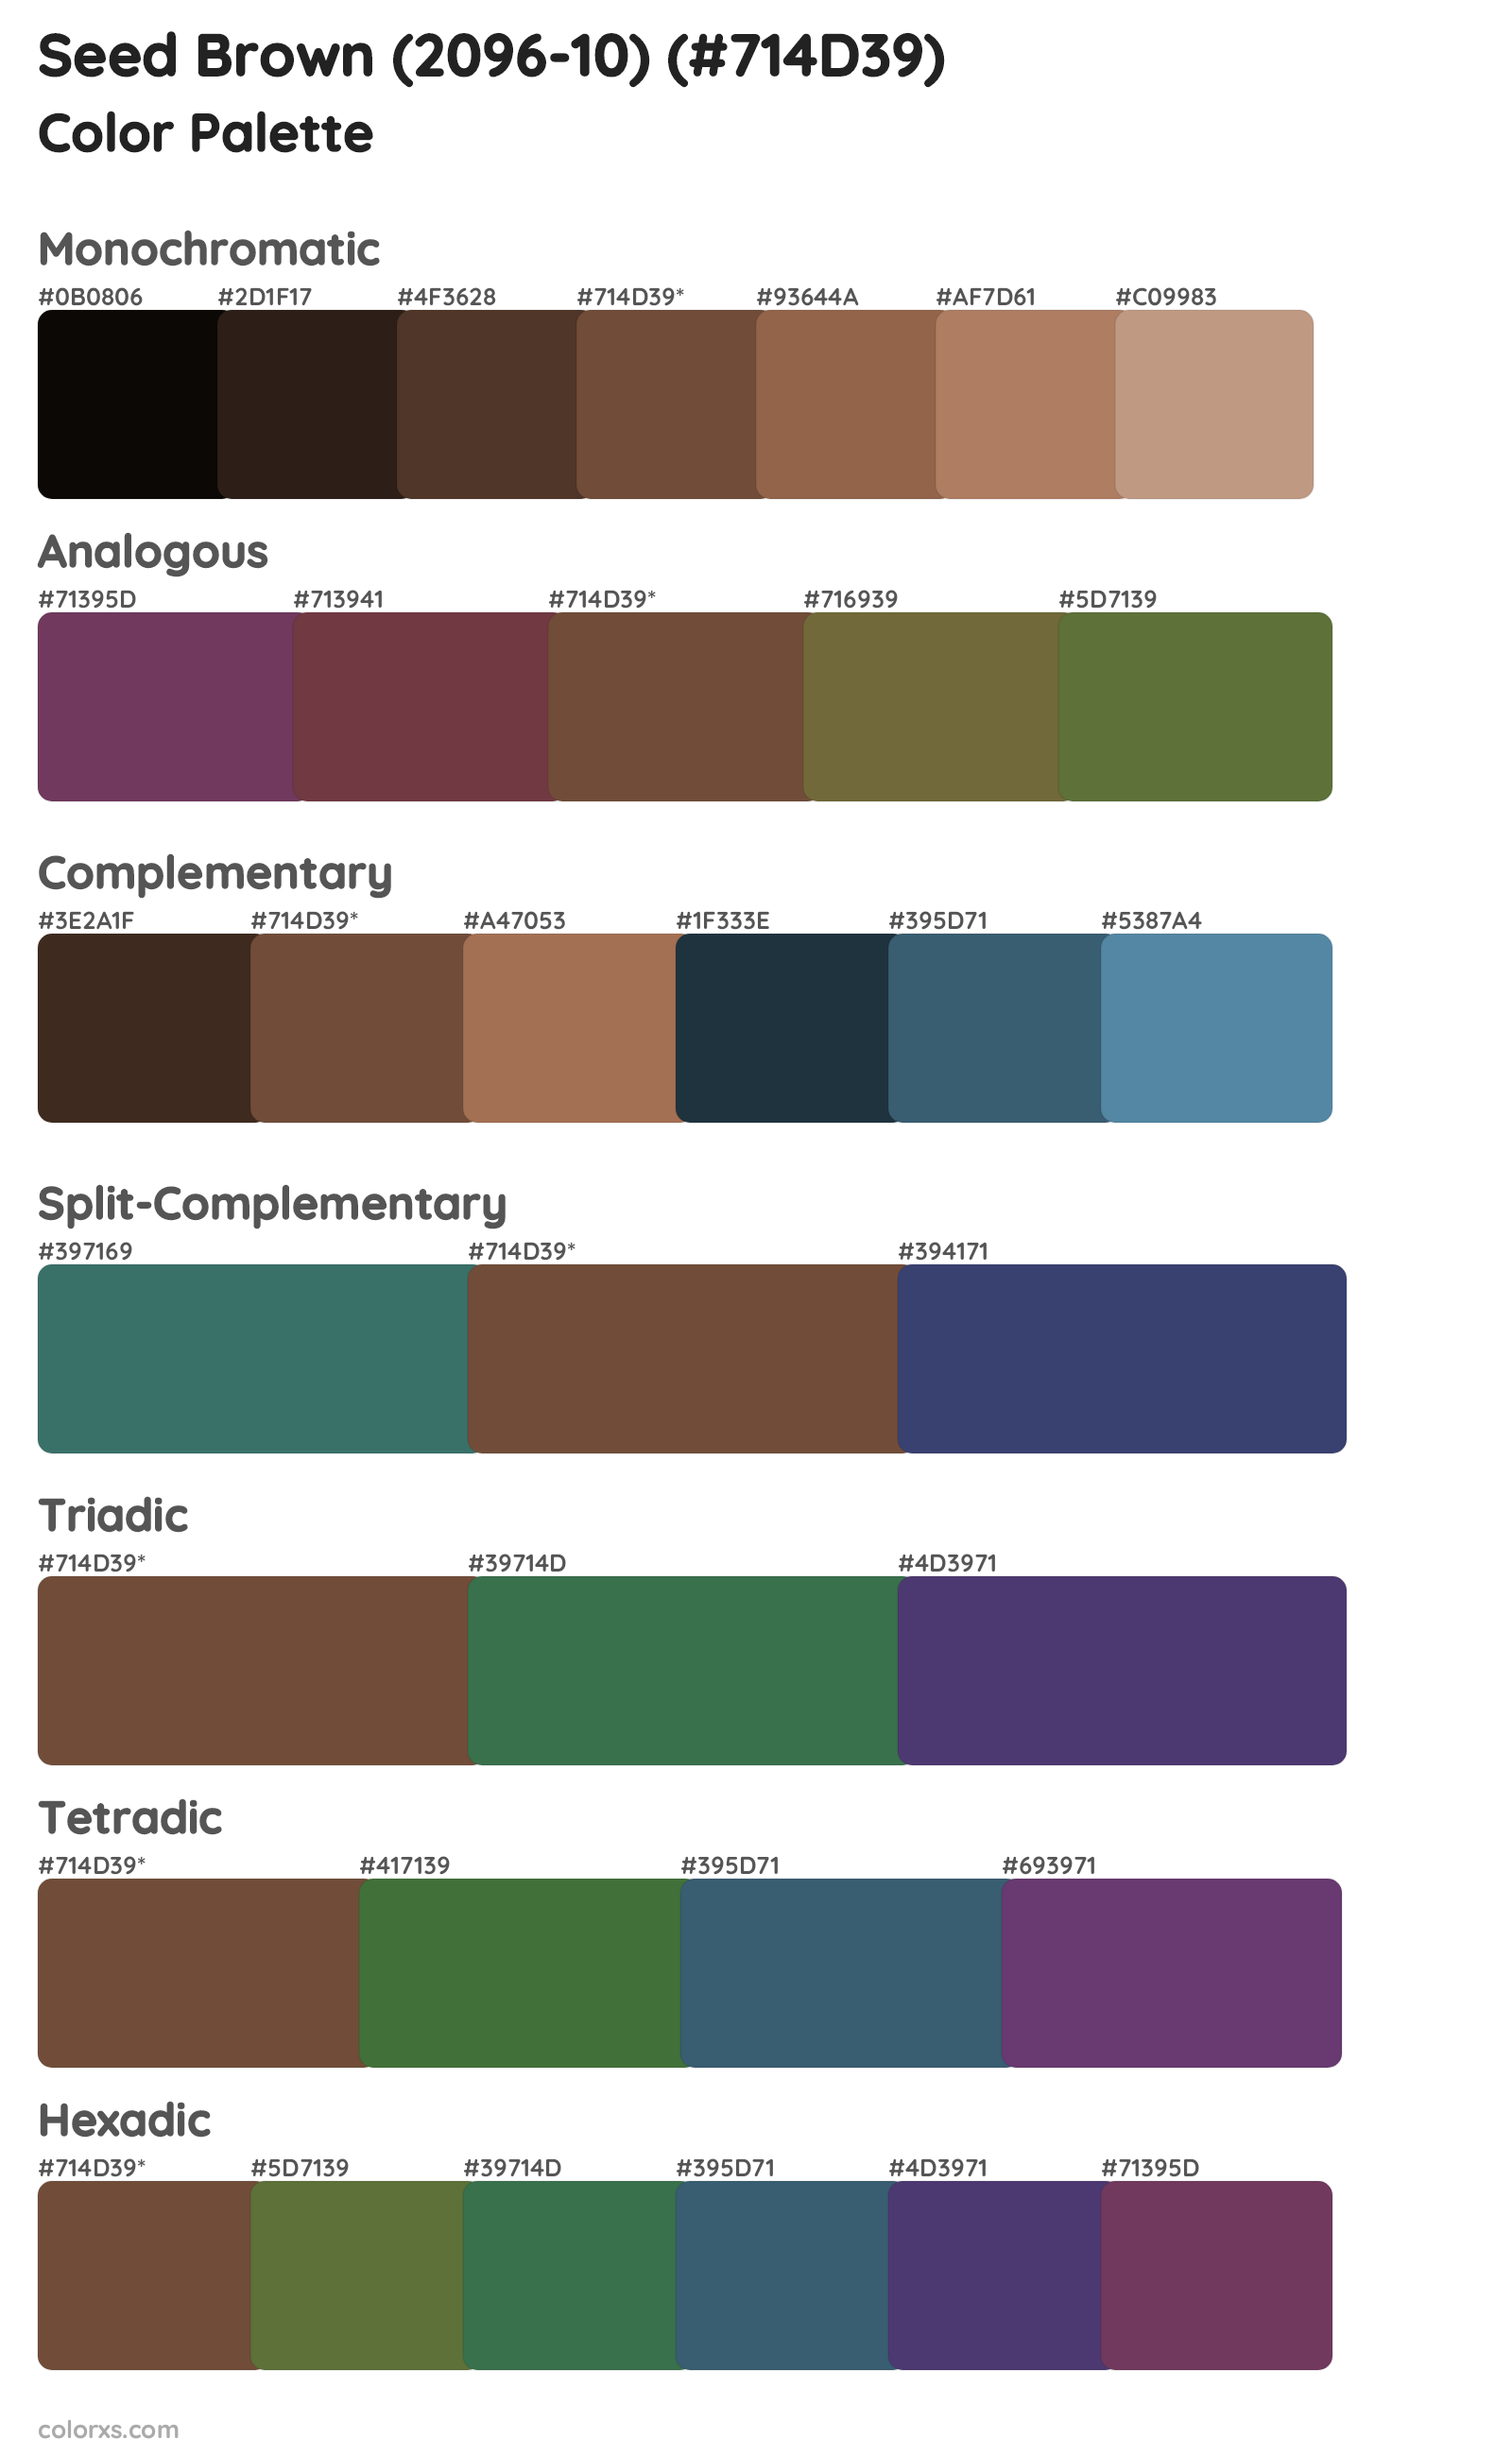 Seed Brown (2096-10) Color Scheme Palettes